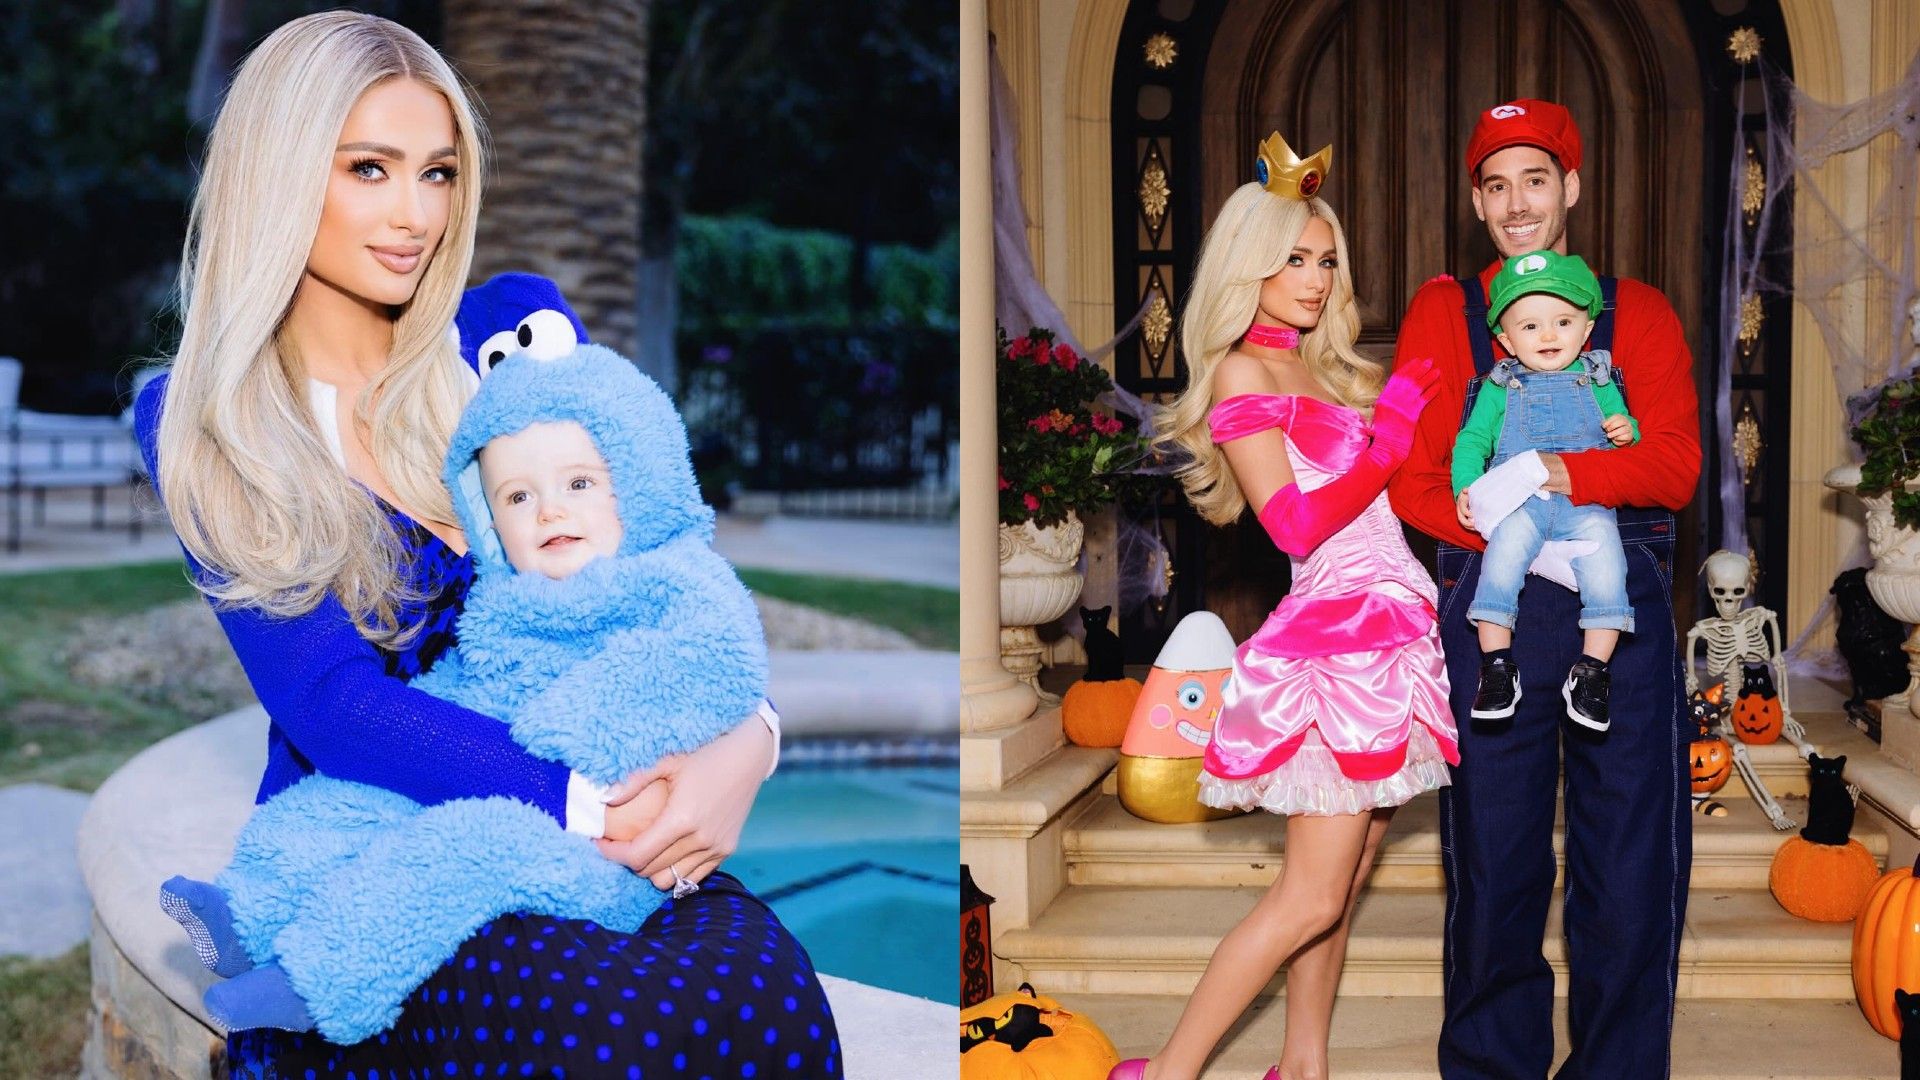 Paris Hilton with her husband and son